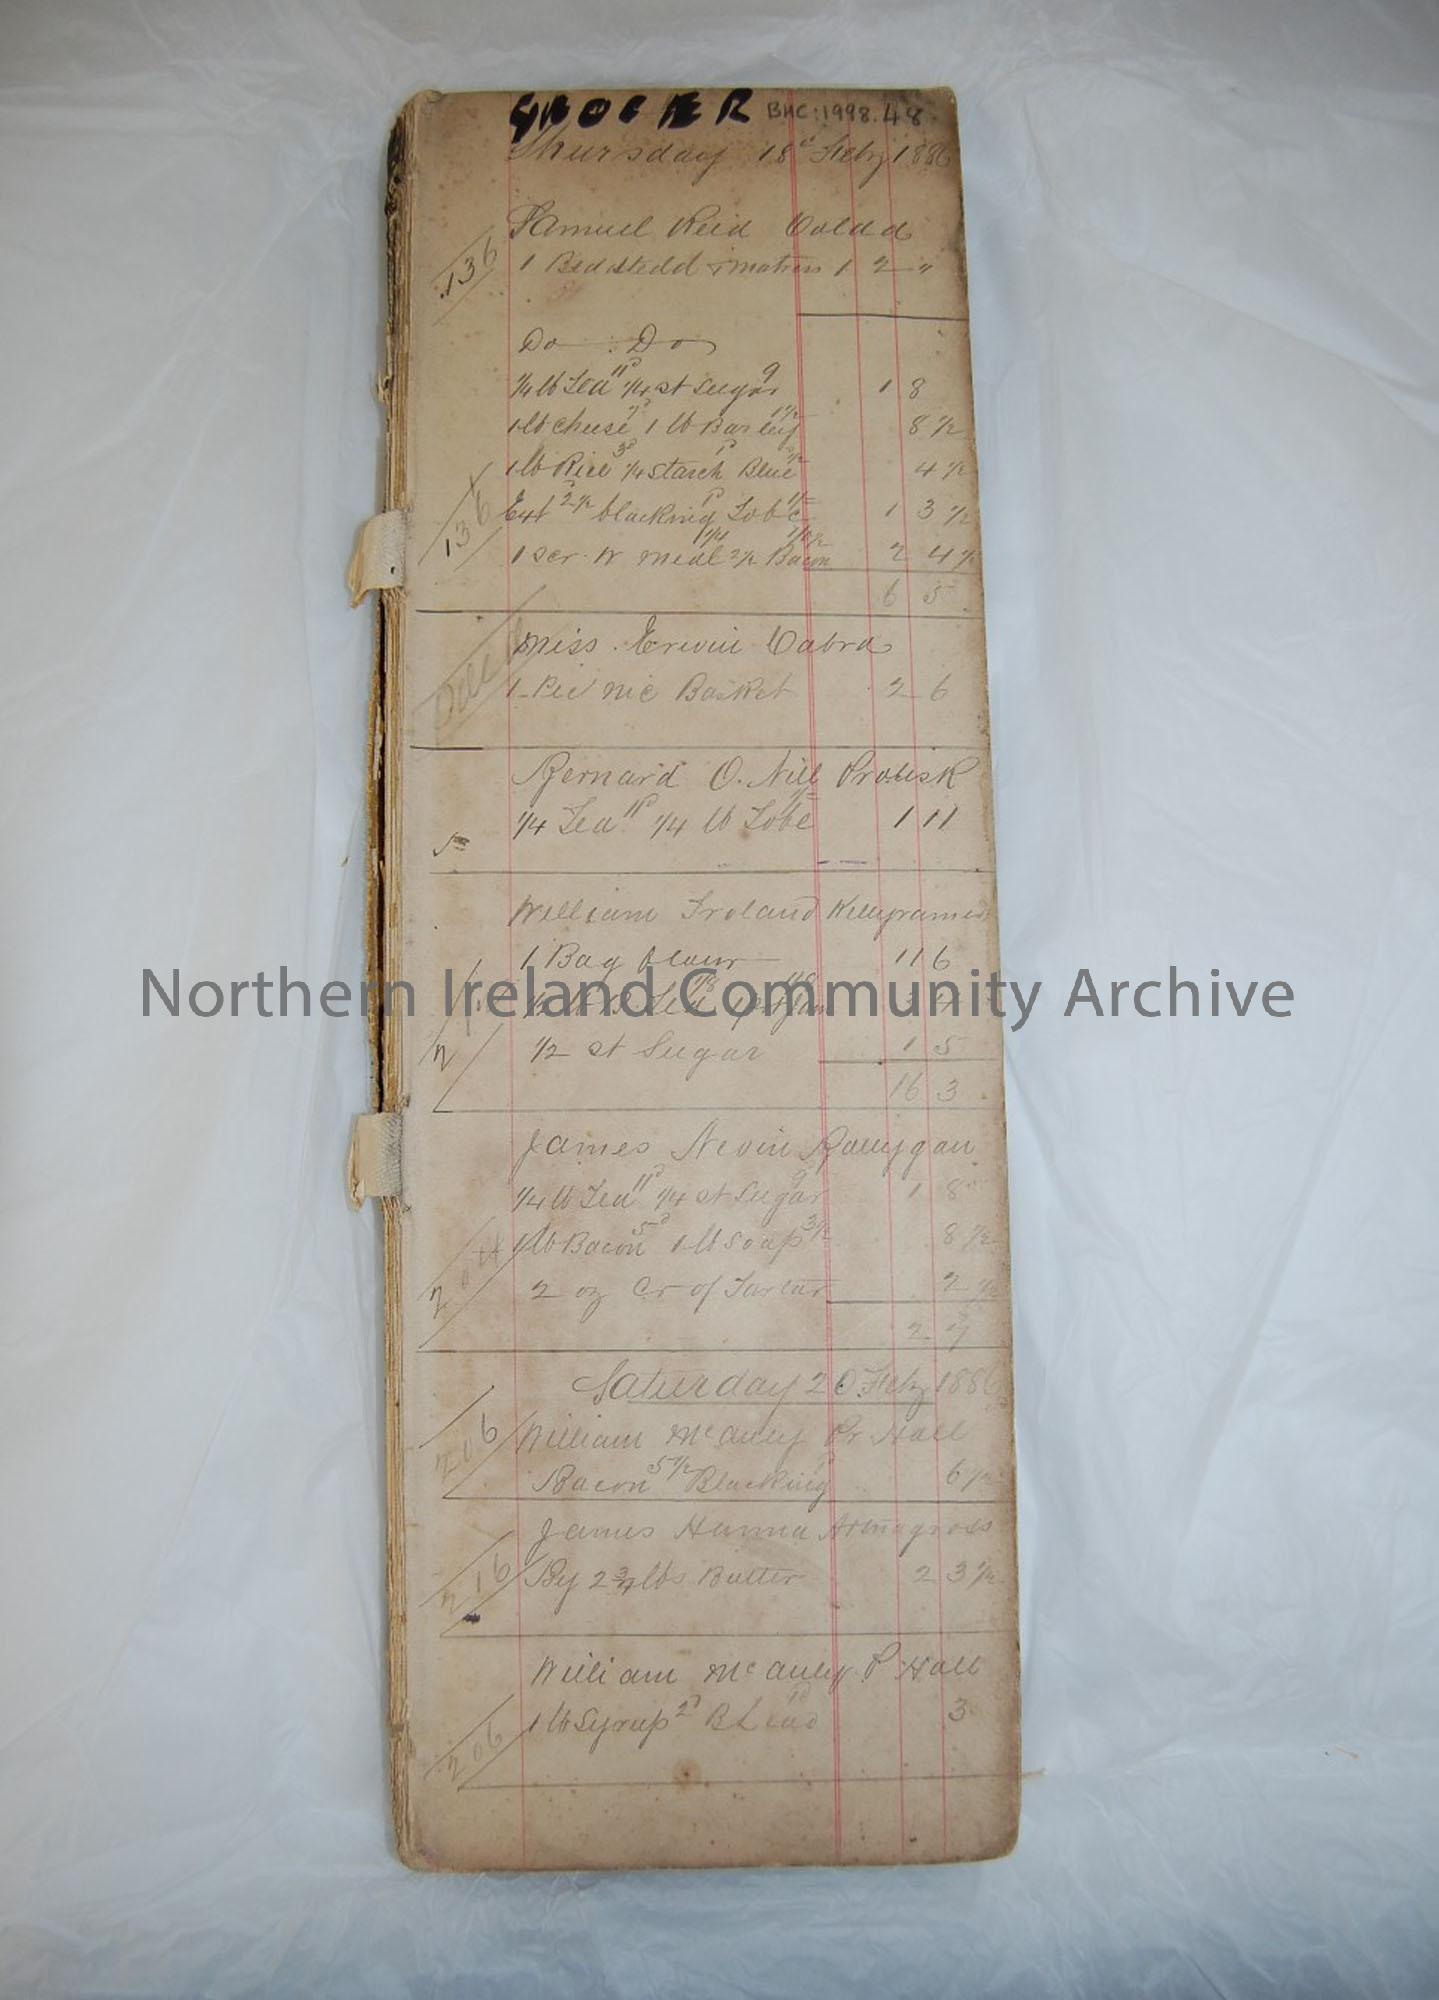 Grocers receipt book. Thursday 18 July 1886 -Monday 23 May 1887 listing purchasers and what they bought